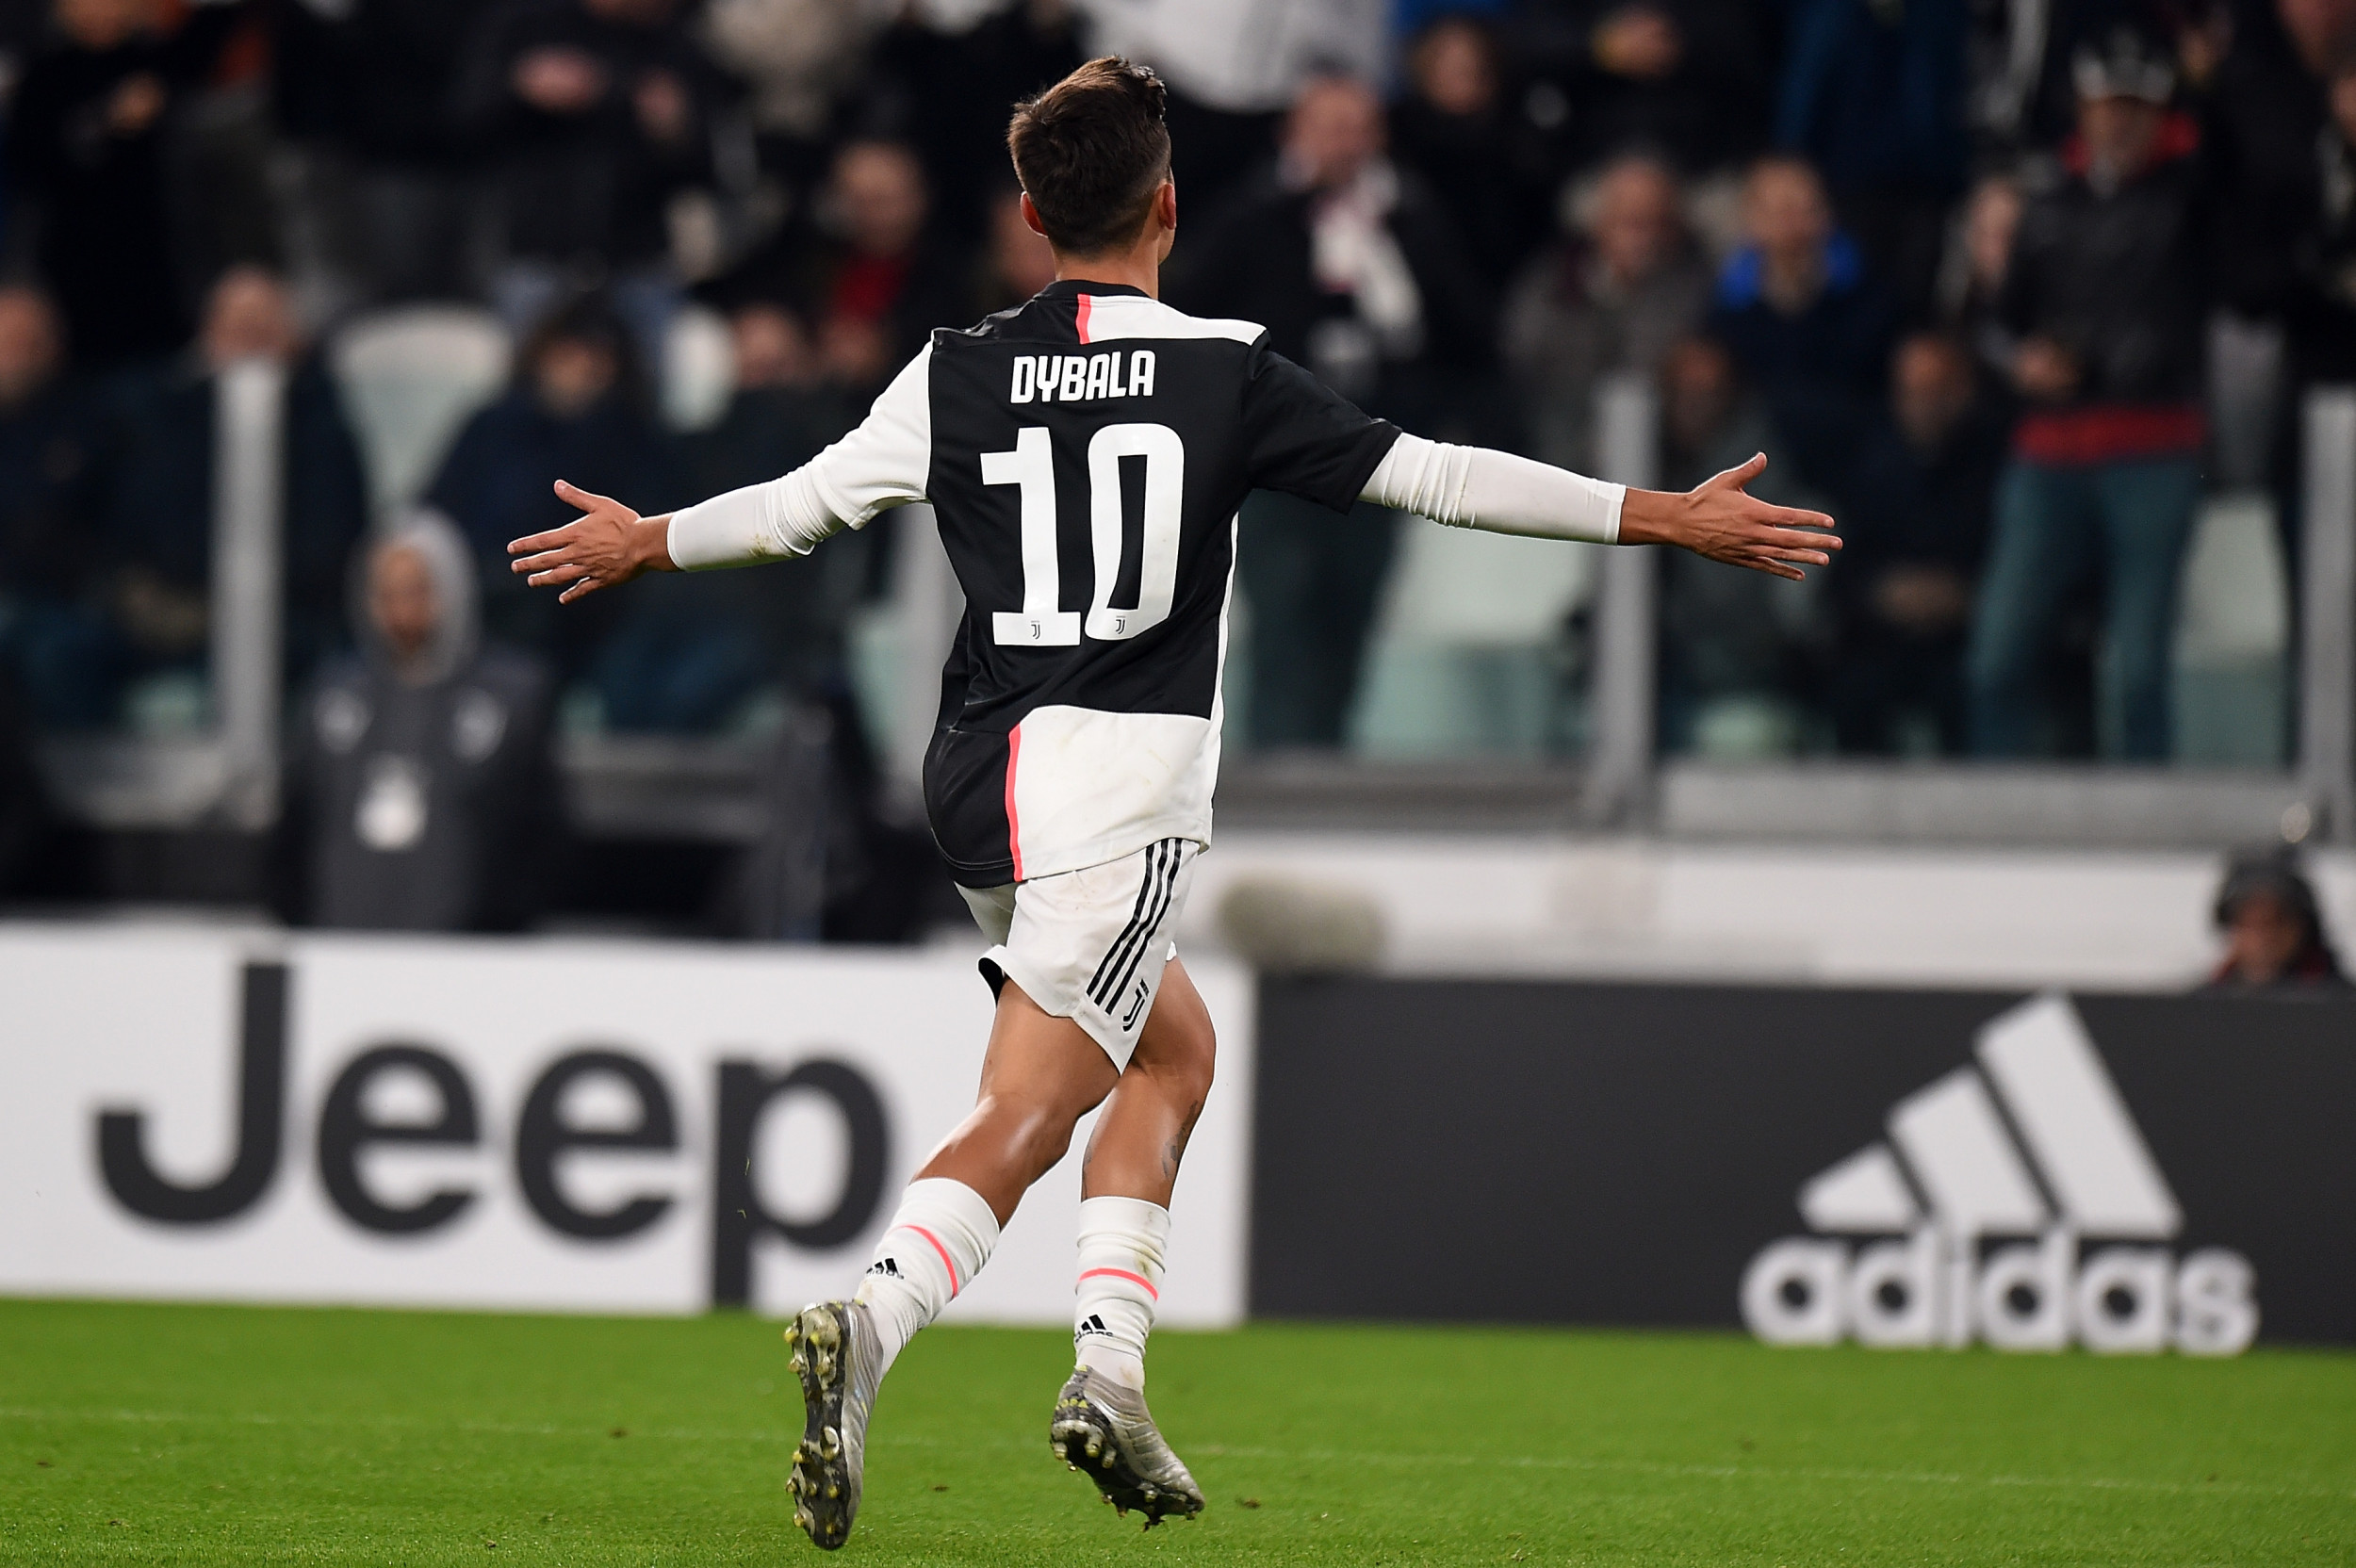 Juventus vs Torino: TV channel, live stream, kick-off time and